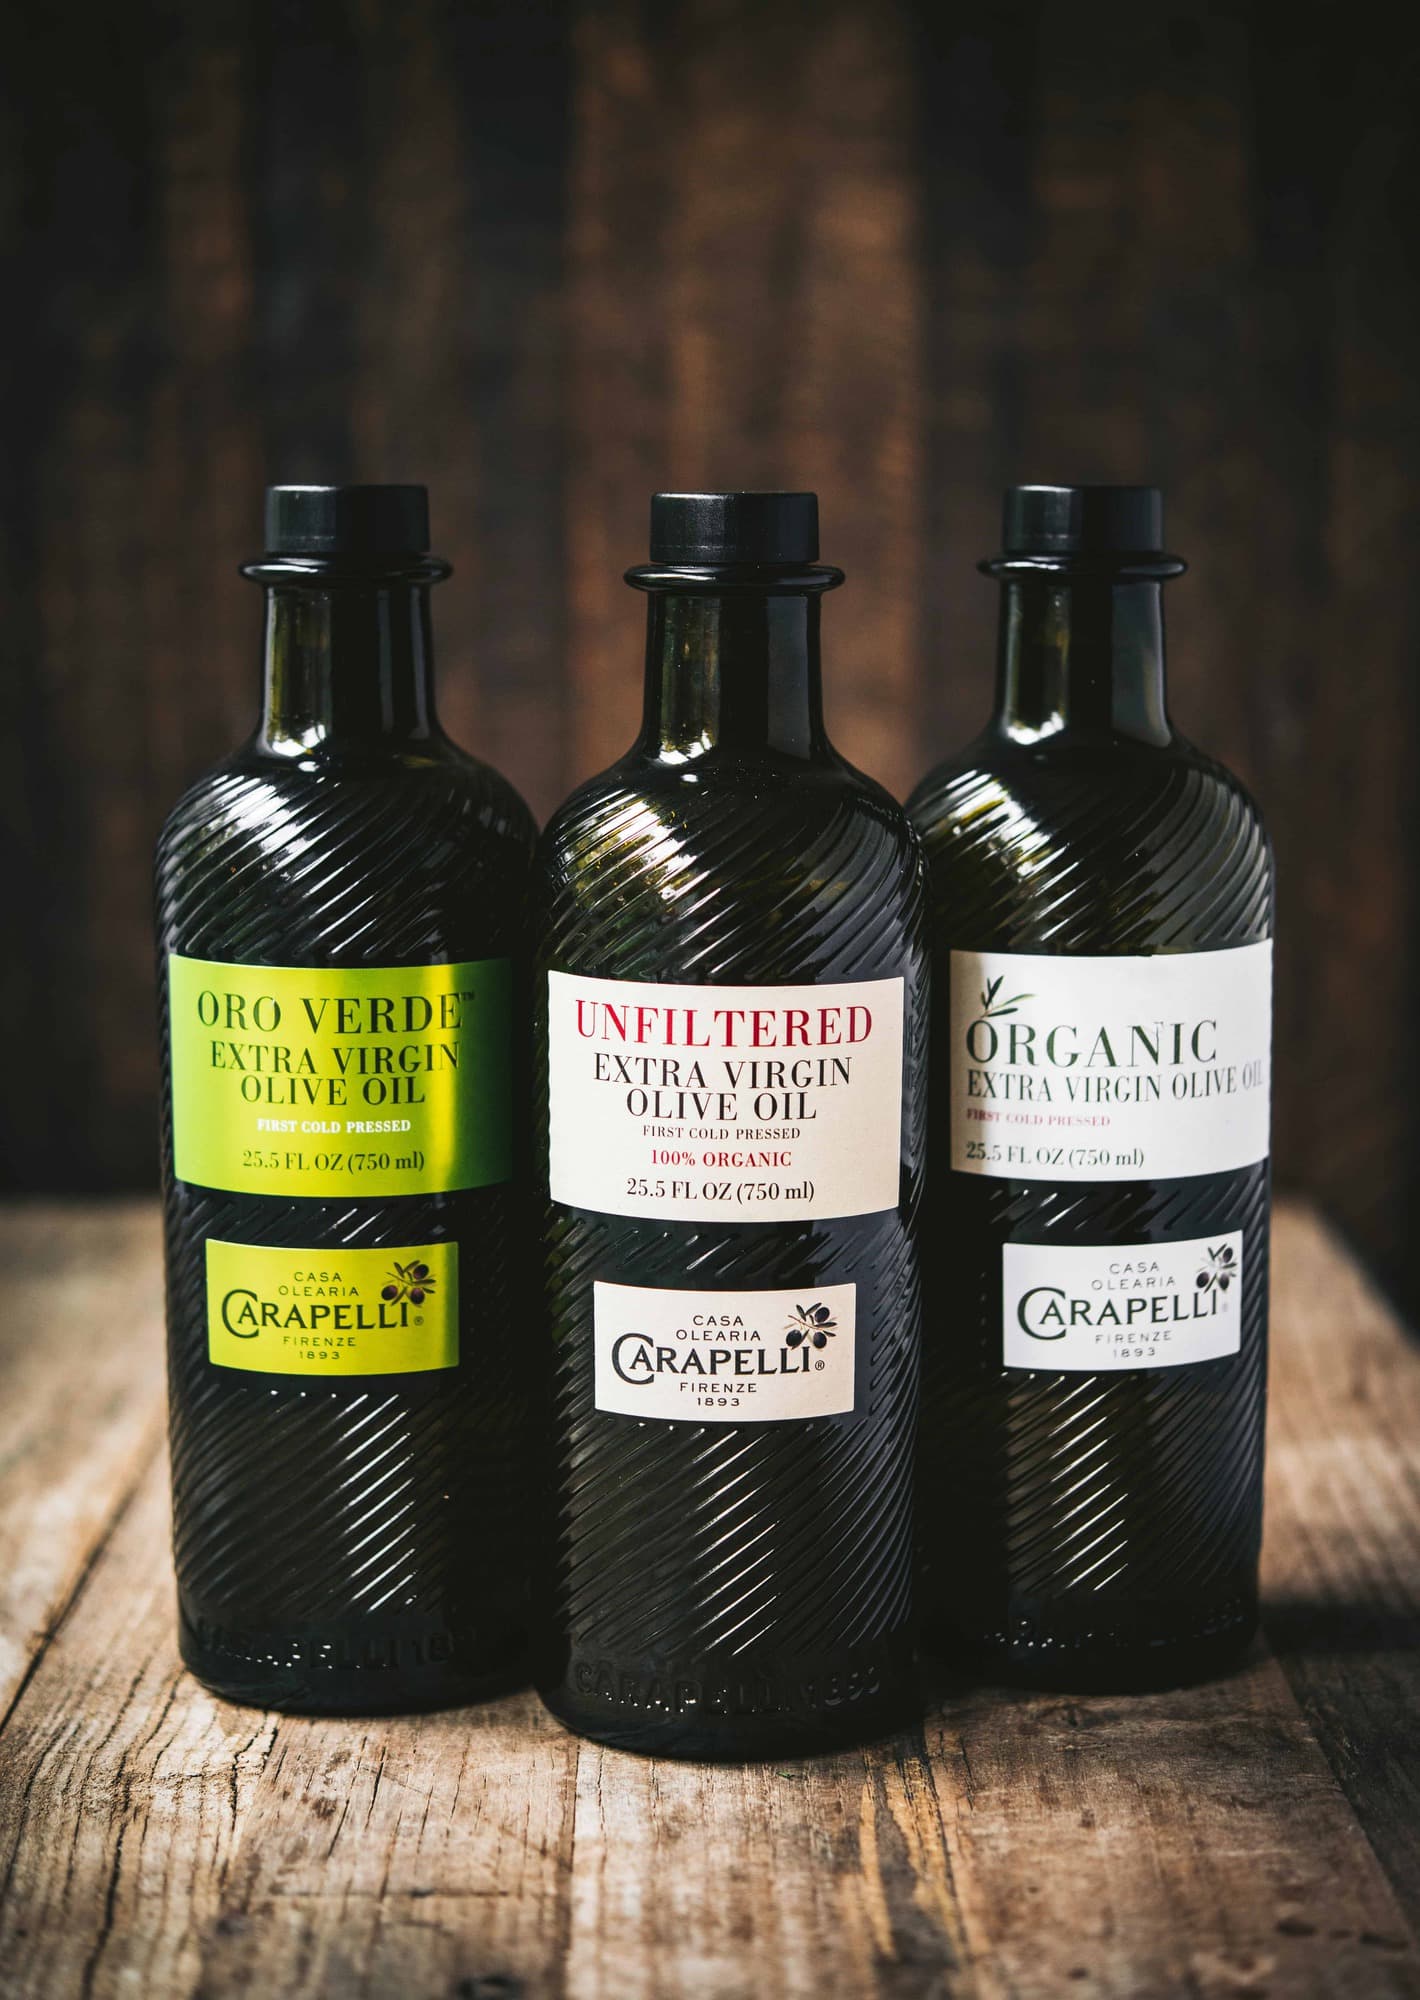 Three bottles of Carapelli Olive Oil on rustic wood background